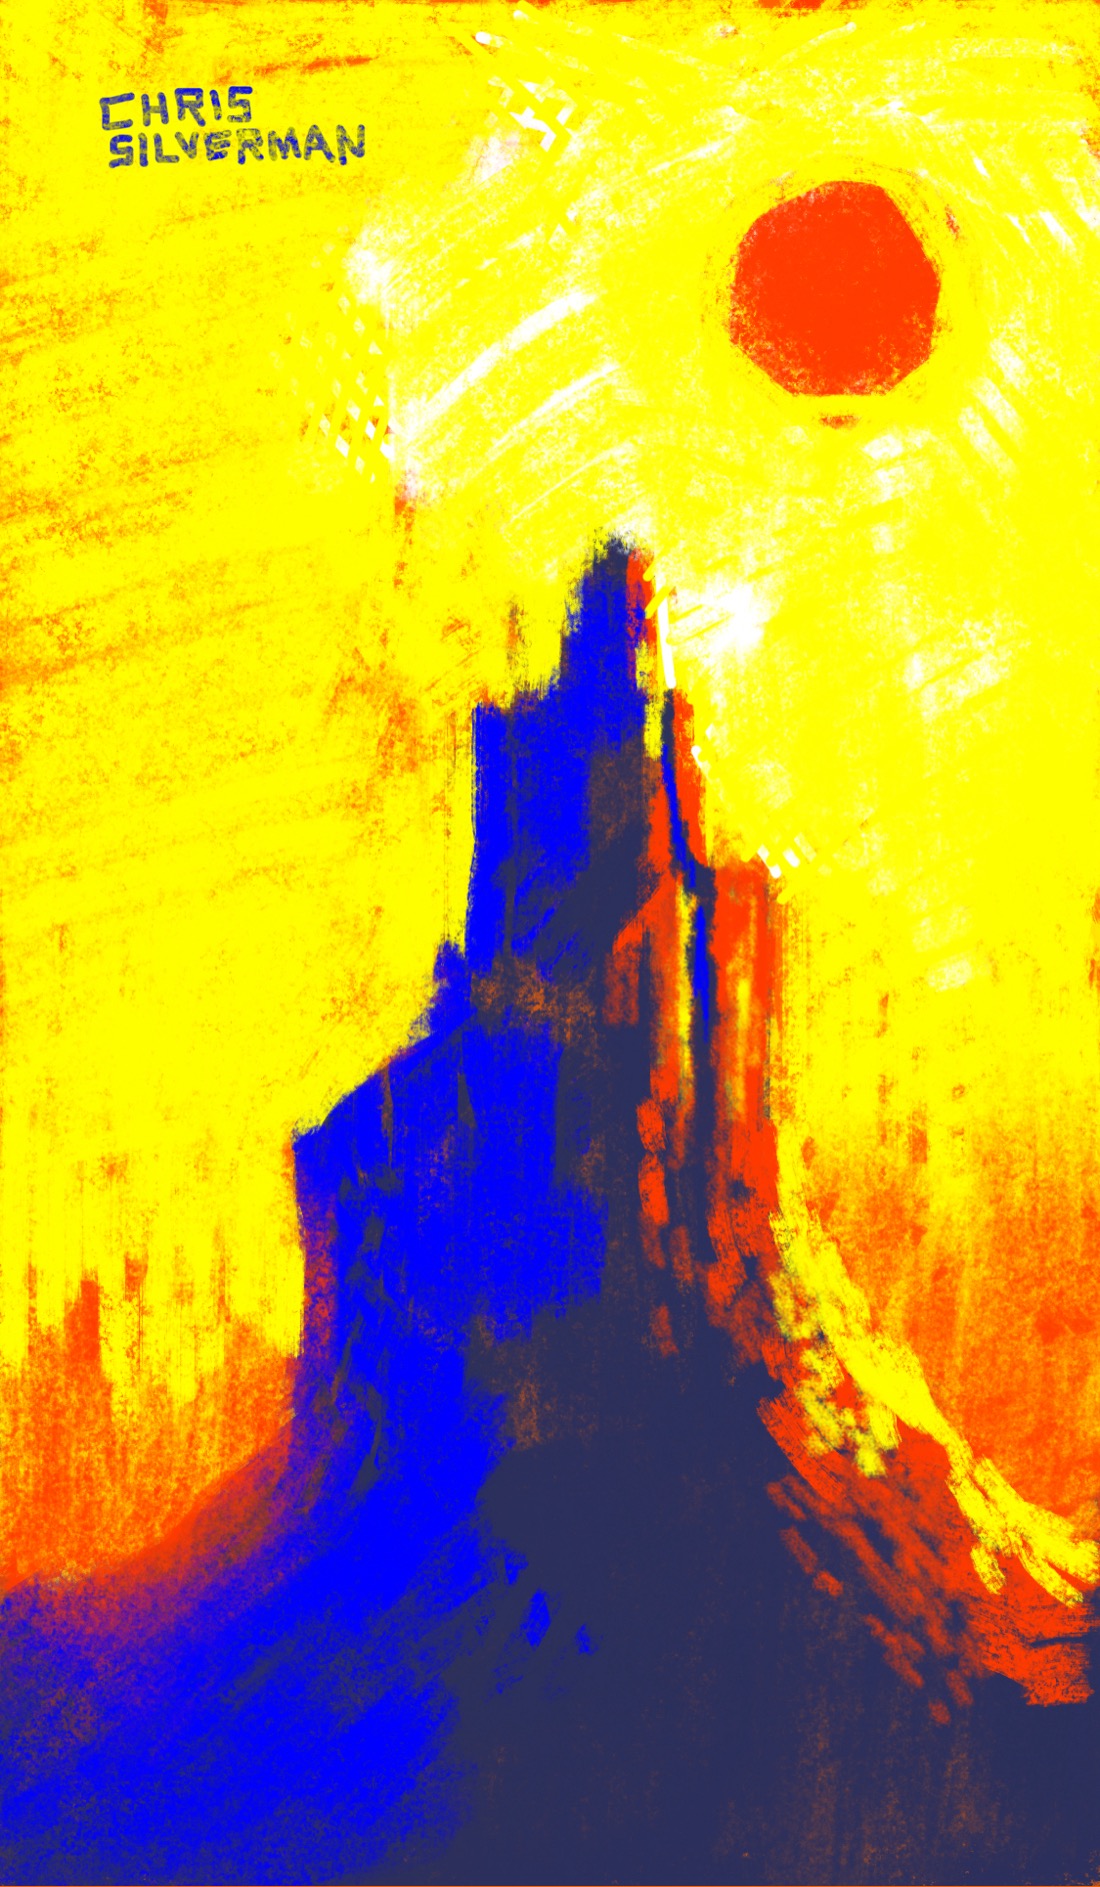 A tall, jagged, rocky promontory, of the sort you'd find in a desert. There are blurry suggestions of similar formations in the background. The red sun blazes high in the sky. This looks like high noon on some remote desert, perhaps even on a different planet. The drawing is composed primarily of four colors: a yellow sky, a red sun, and the black rock that's blazing red on the side towards the sun and a deep blue on the side facing away from it.